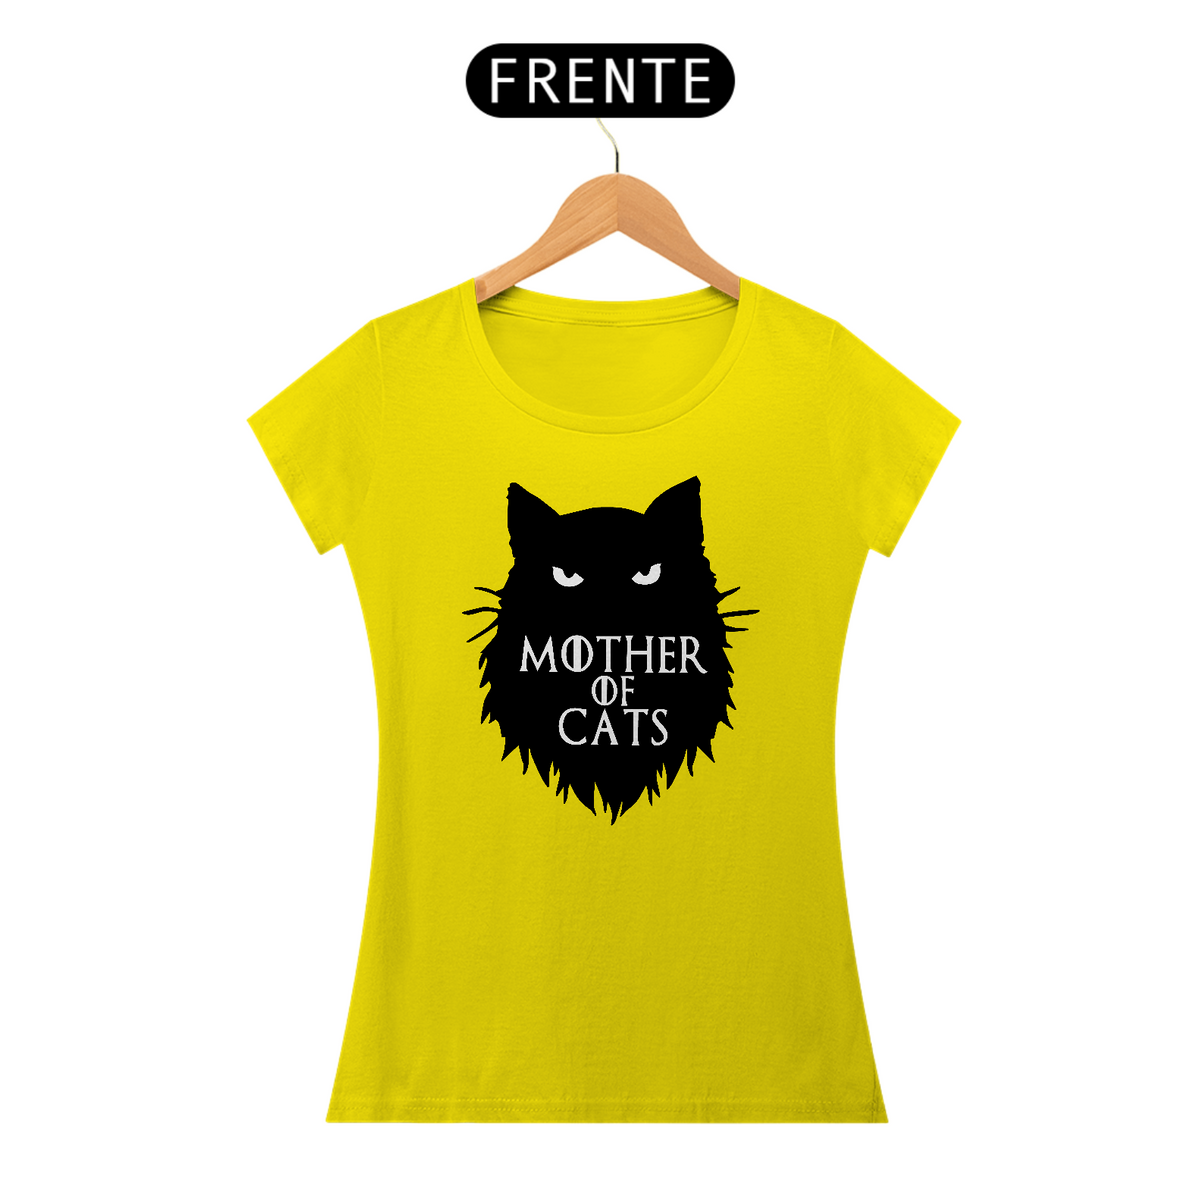 Nome do produto: Camisa Baby Long Classic Mother of Cats